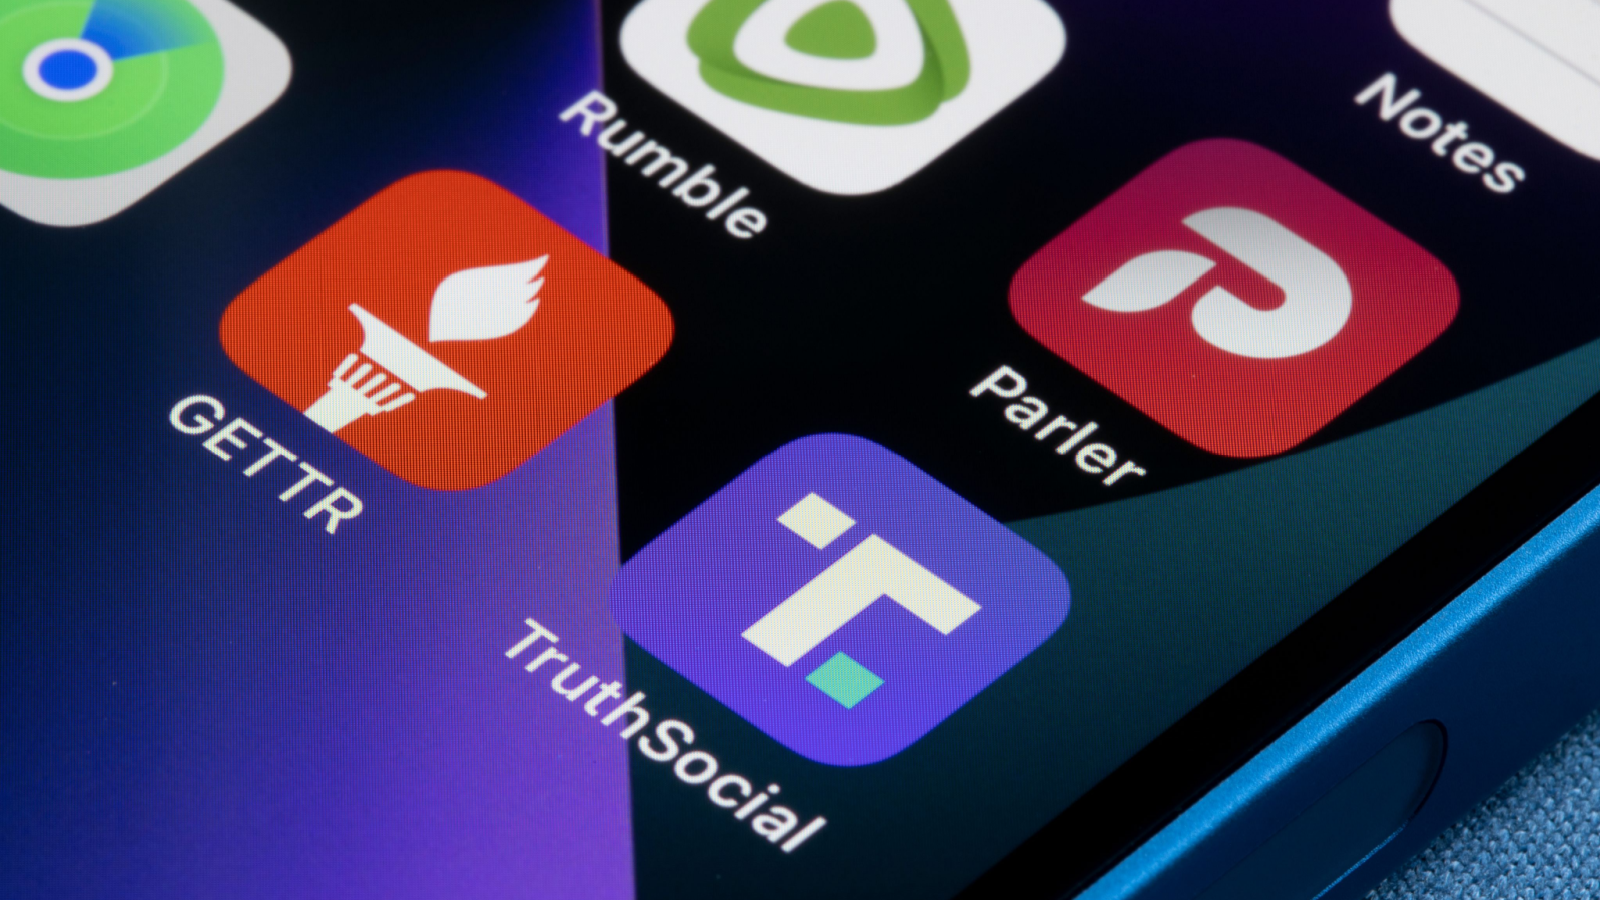 Truth Social (DWAC Stock Fans), Gettr, Rumble (RUM) and Parler app icons are seen on an iPhone. Donald Trump's new social media venture, Truth Social, launched on Feb 20 in Apple's App Store.